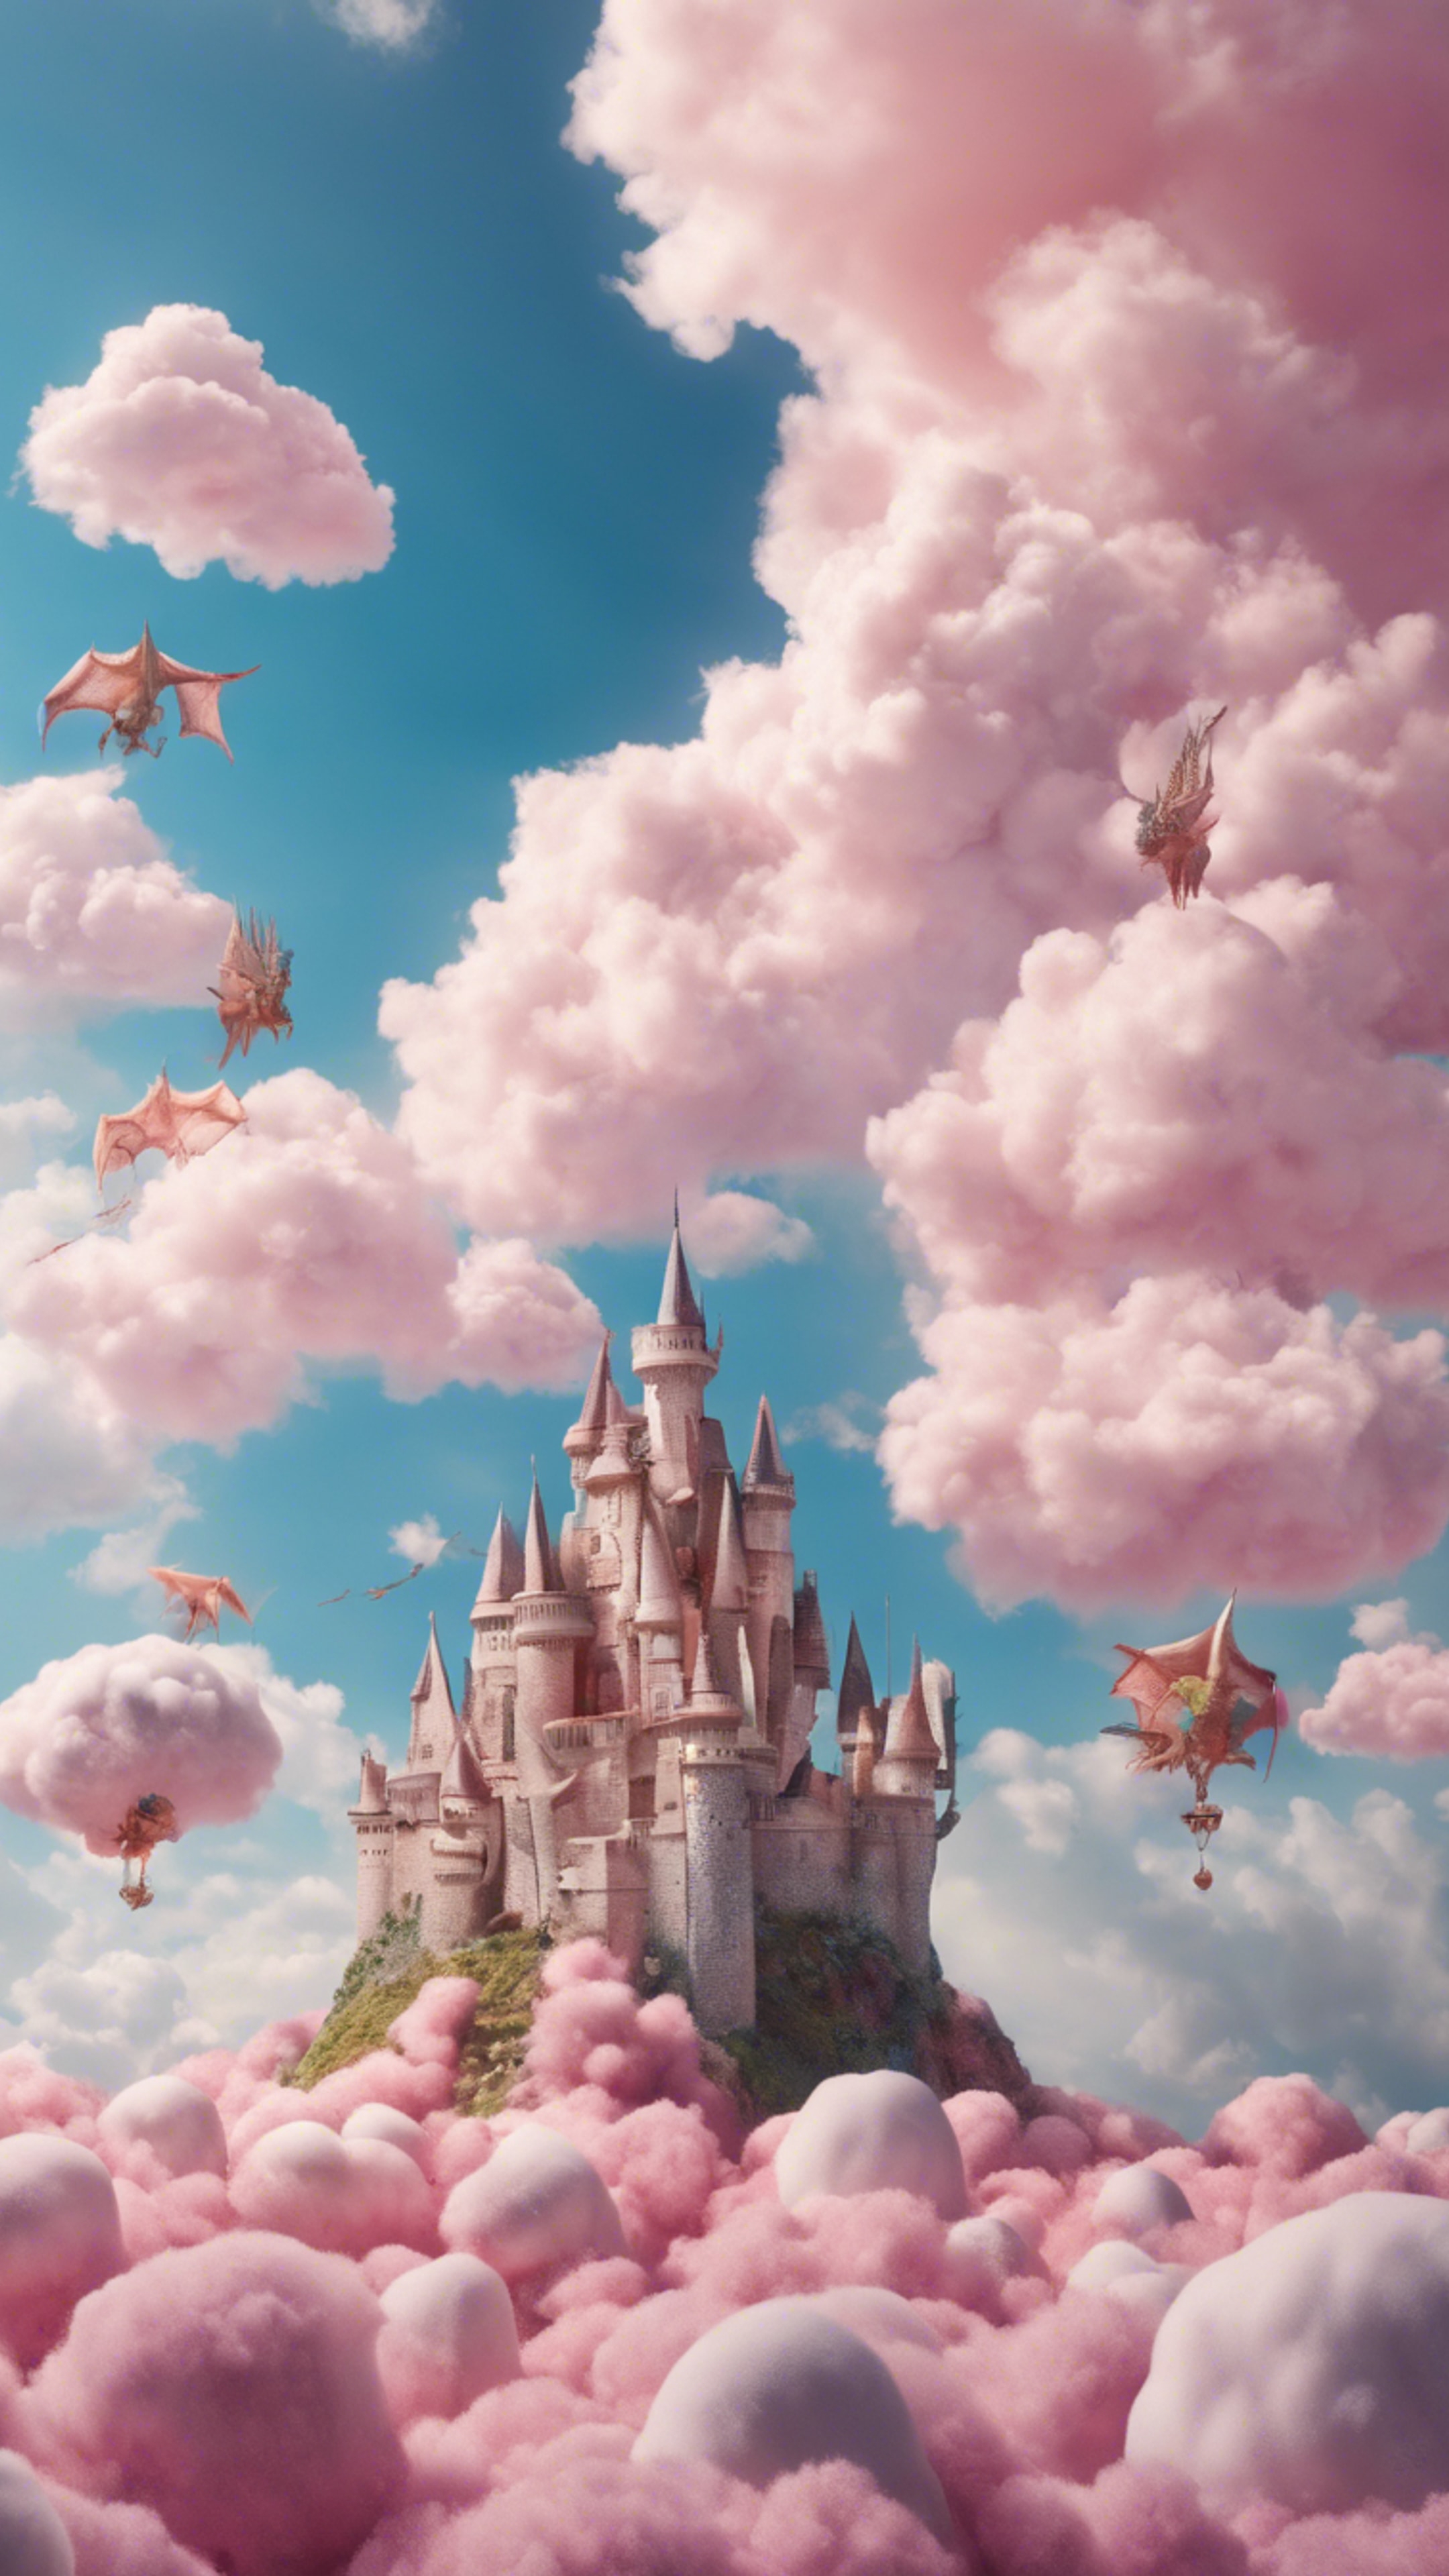 A castle floating in the sky above fluffy, cotton-candy-like clouds surrounded by a huddle of playful, magical dragons. Tapeta[be63bba74c3941c98c10]